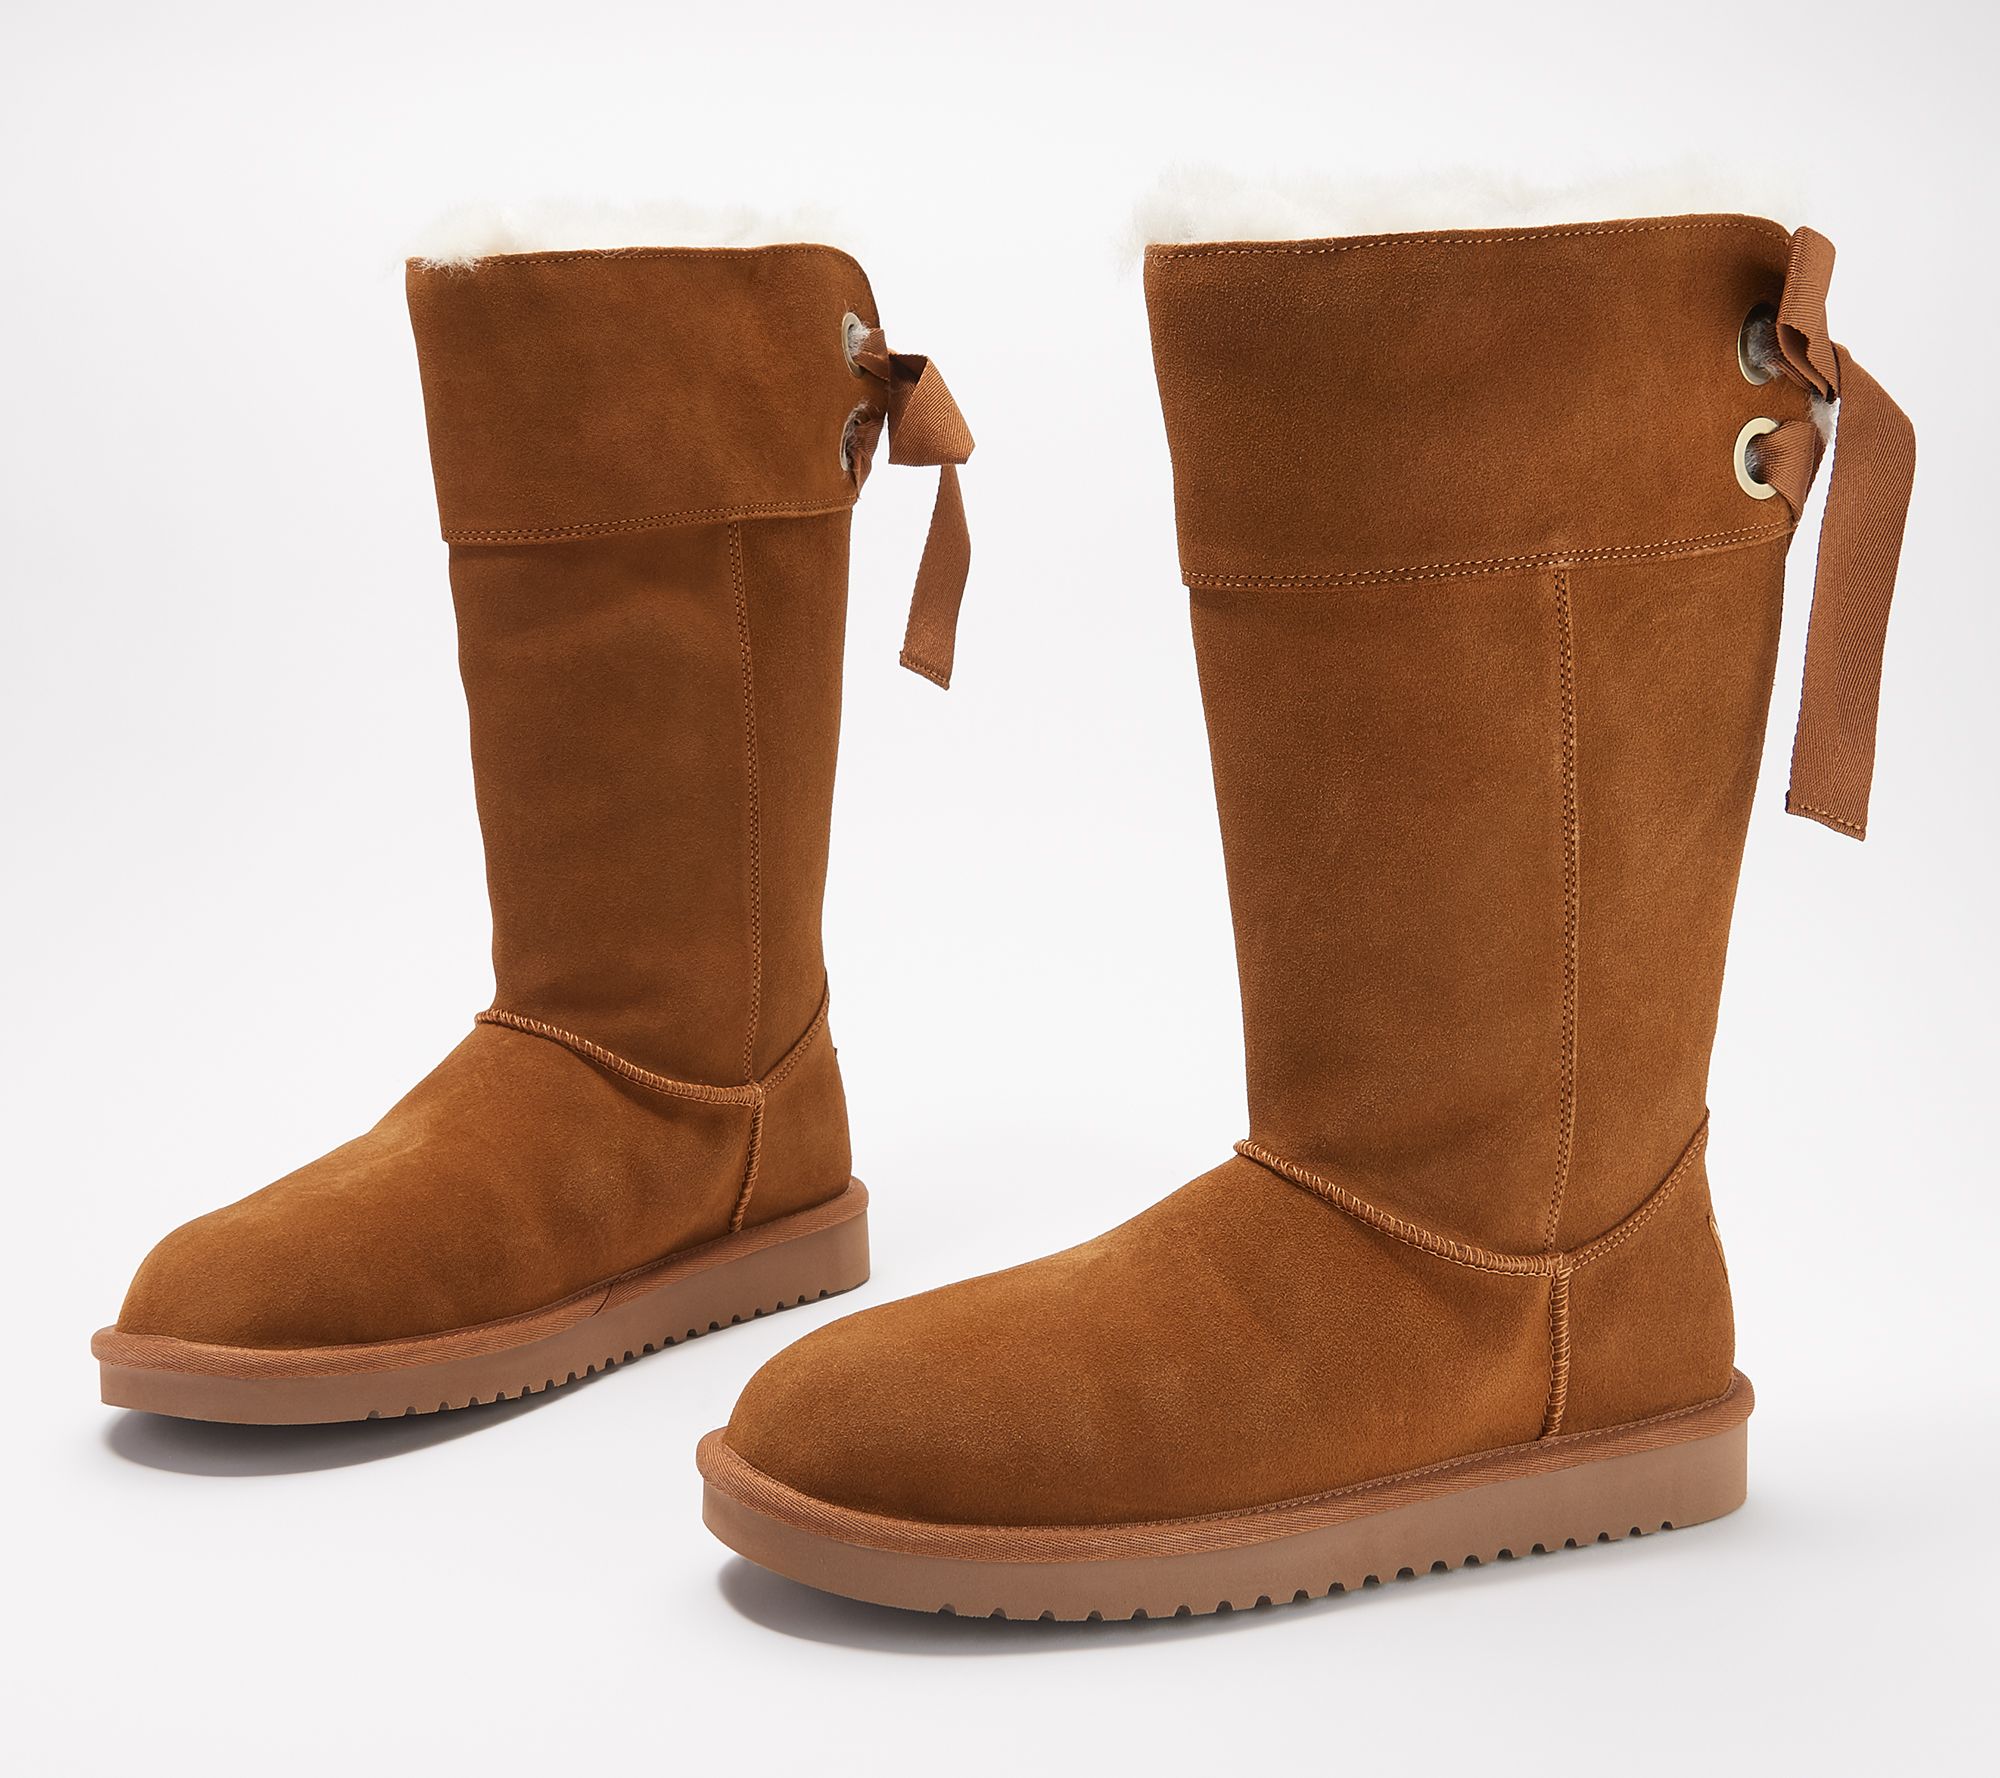 koolaburra by ugg are they real